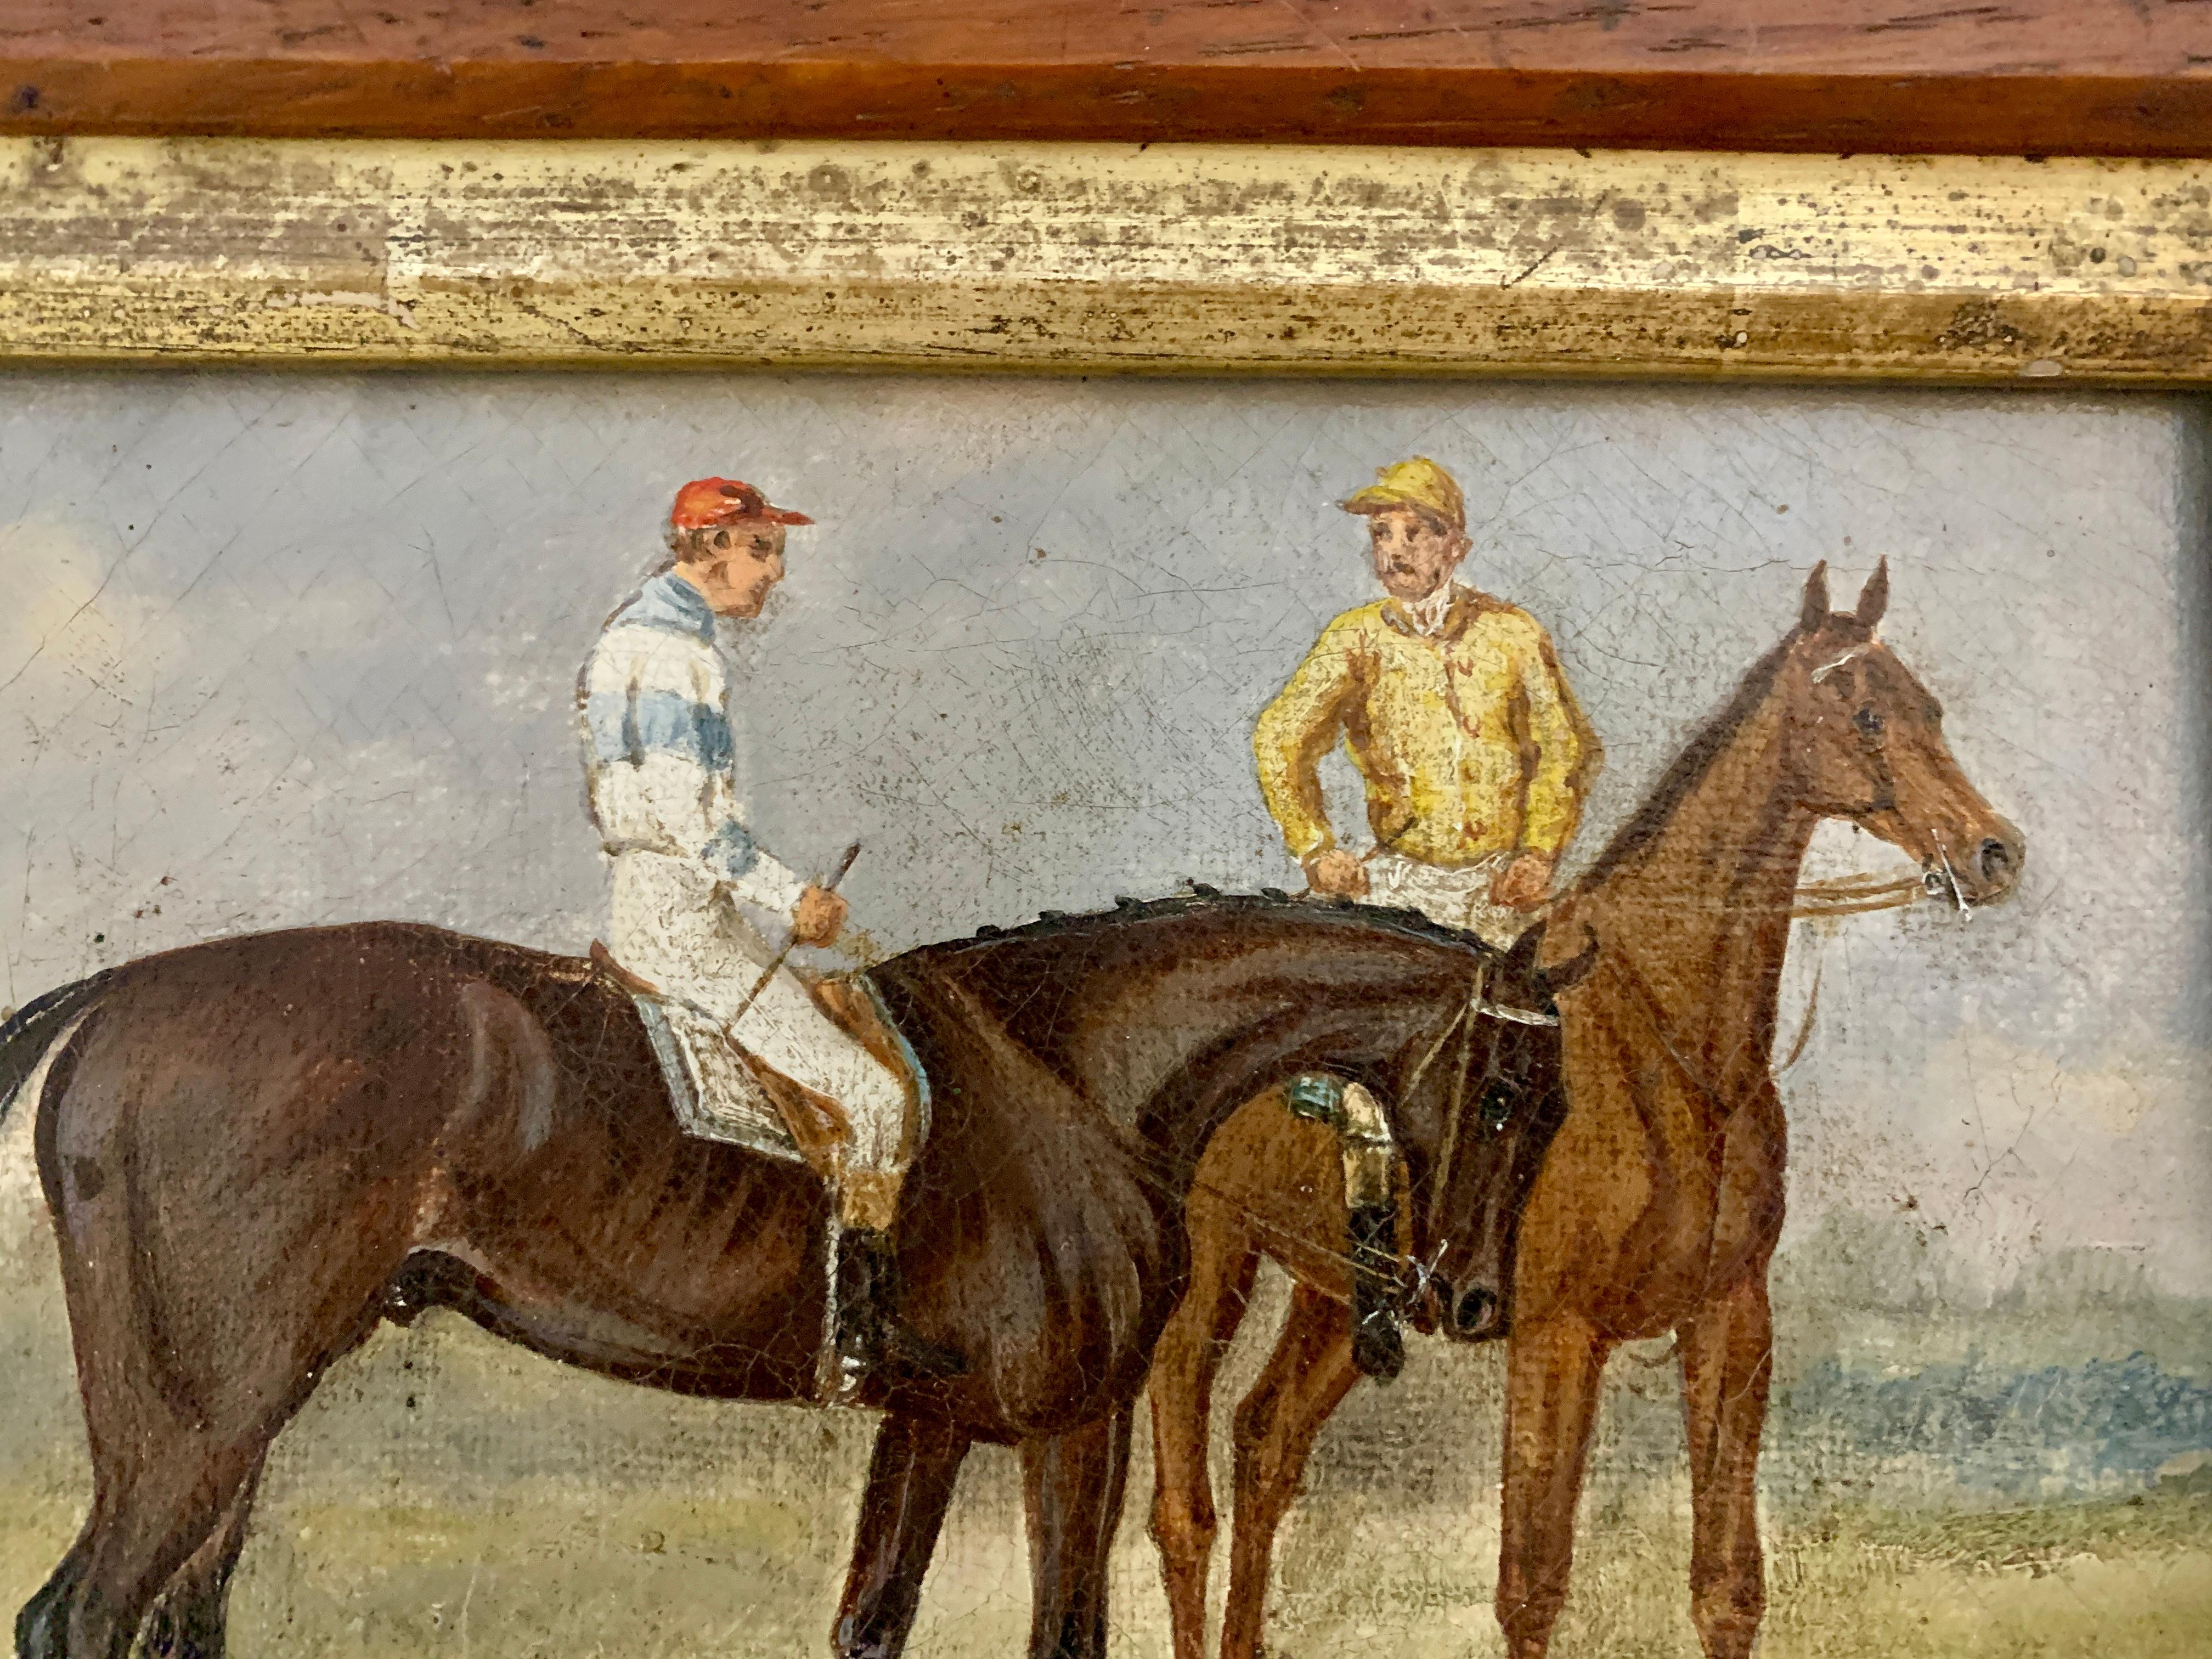 19th century English Horse racing scene with jockeys on horse back in landscape - Victorian Painting by Unknown